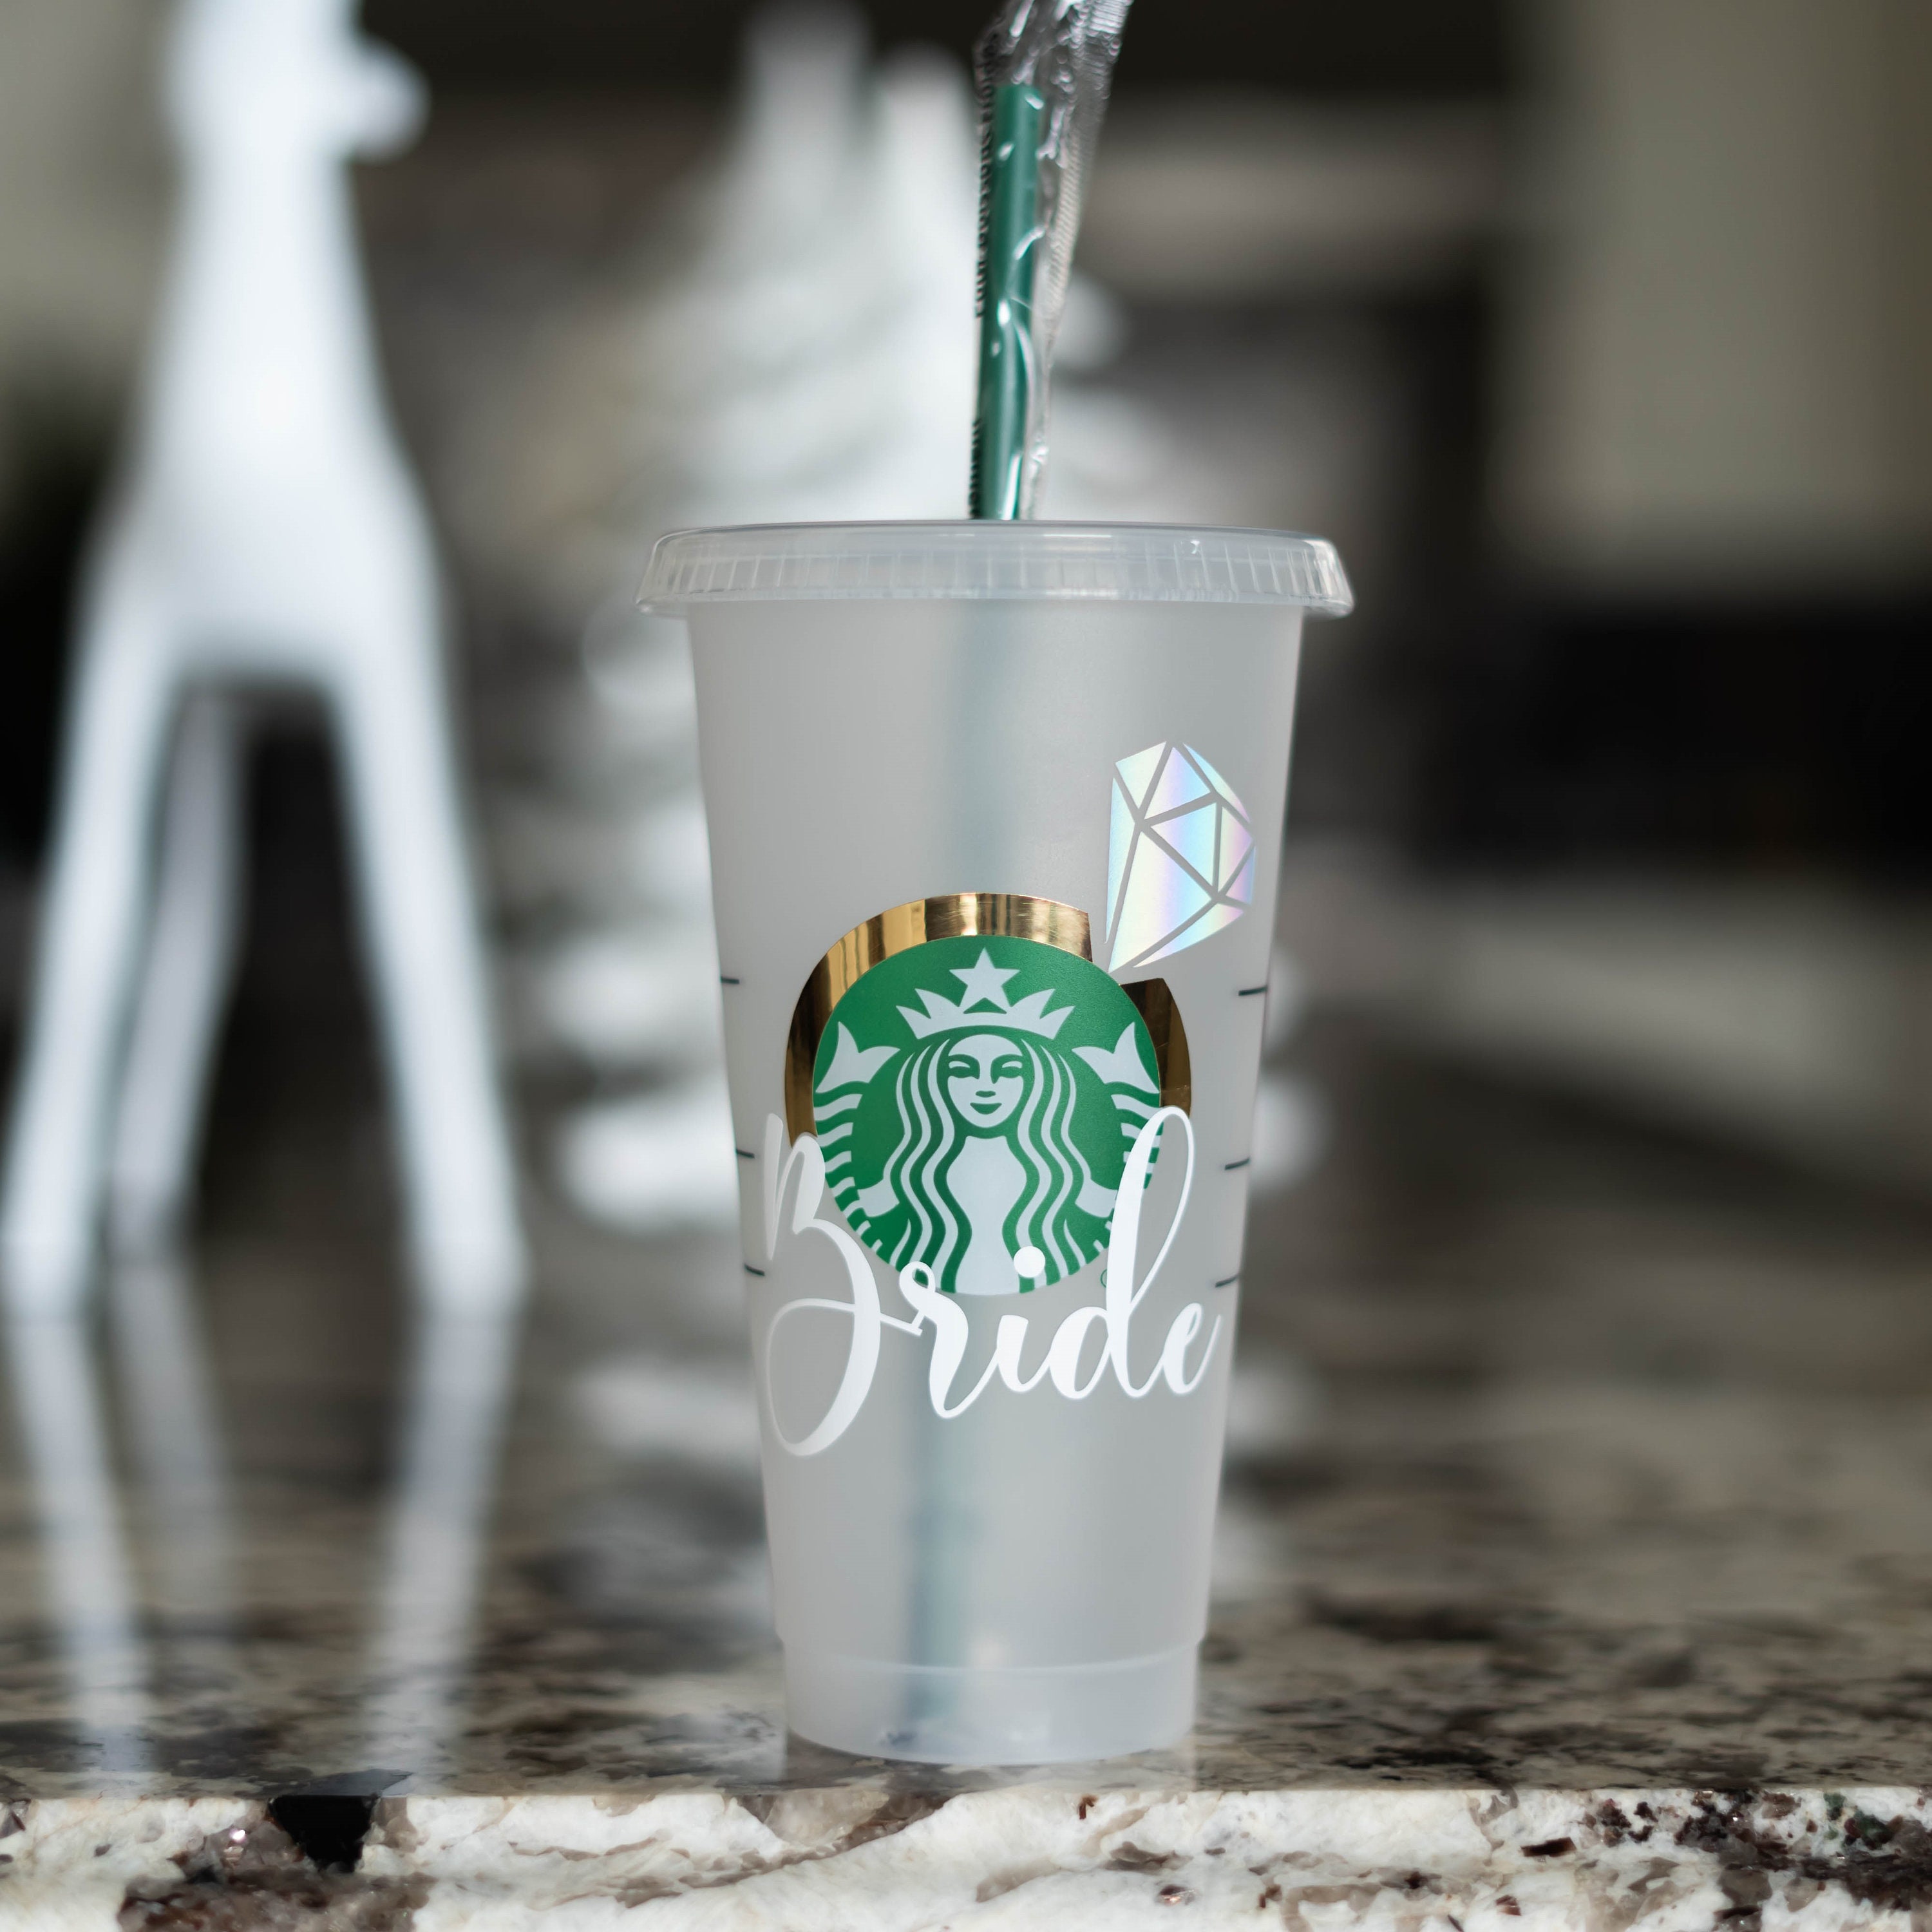 Starbucks Engagement Gift for Bride Bride Cup Gift for Her Bride to Be Custom Personalized Starbucks Cup Bachelorette Party Cup